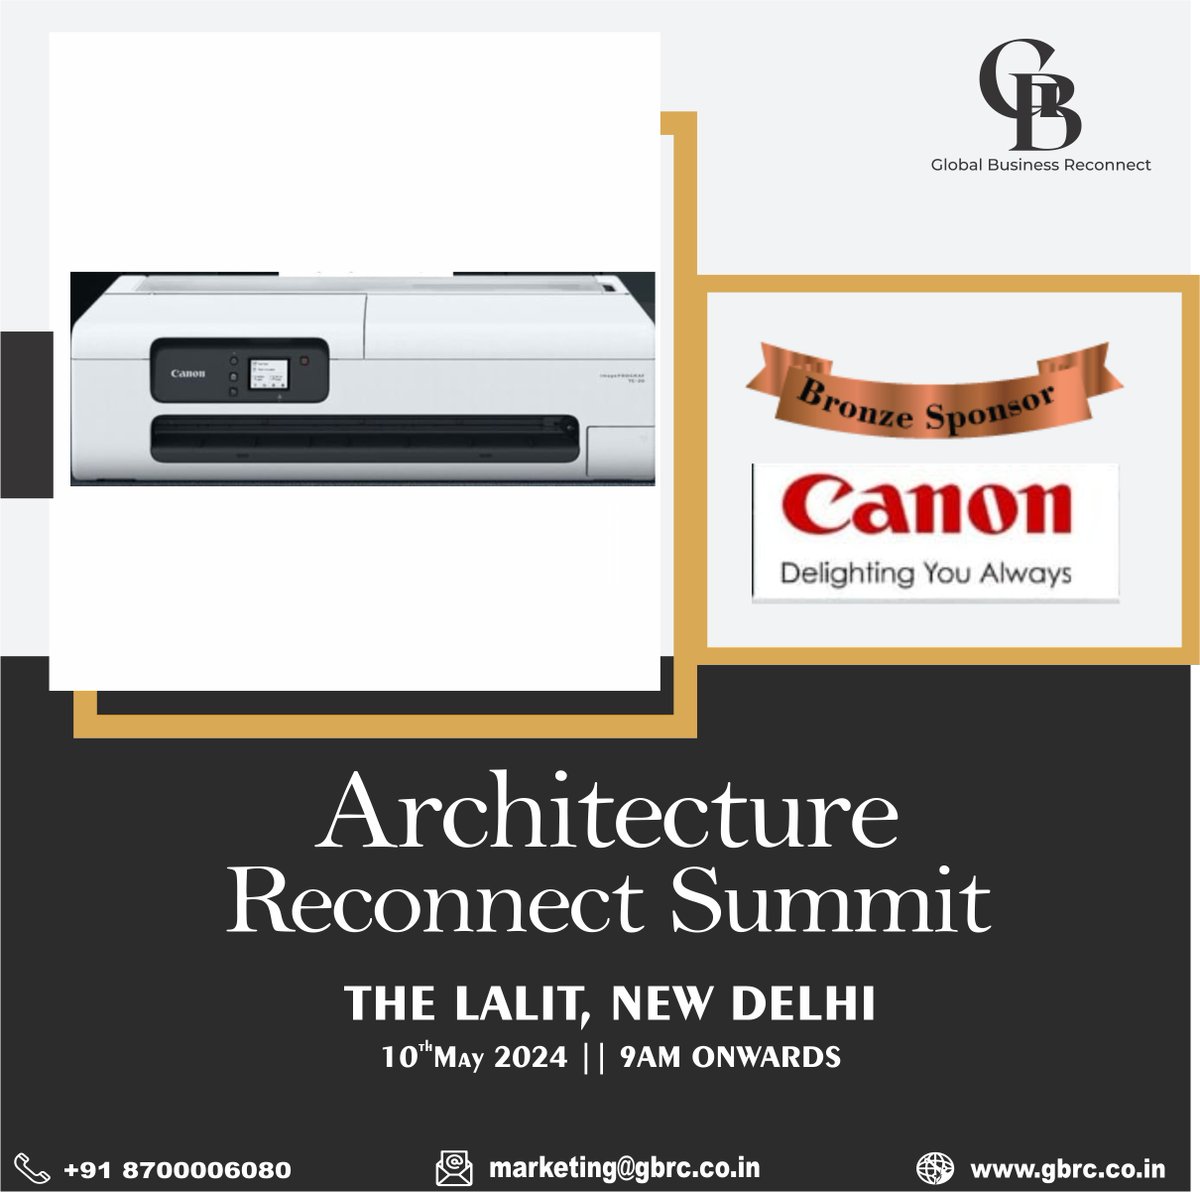 Having CANON India as a Bronze Sponsor for the Architecture Reconnect Summit is indeed a significant boost to the event. happening on May 10th, 2024 at The Lalit, New Delhi.
Their support will contribute to the success and impact of the summit.

#architecturereconnectsummit #GBRC